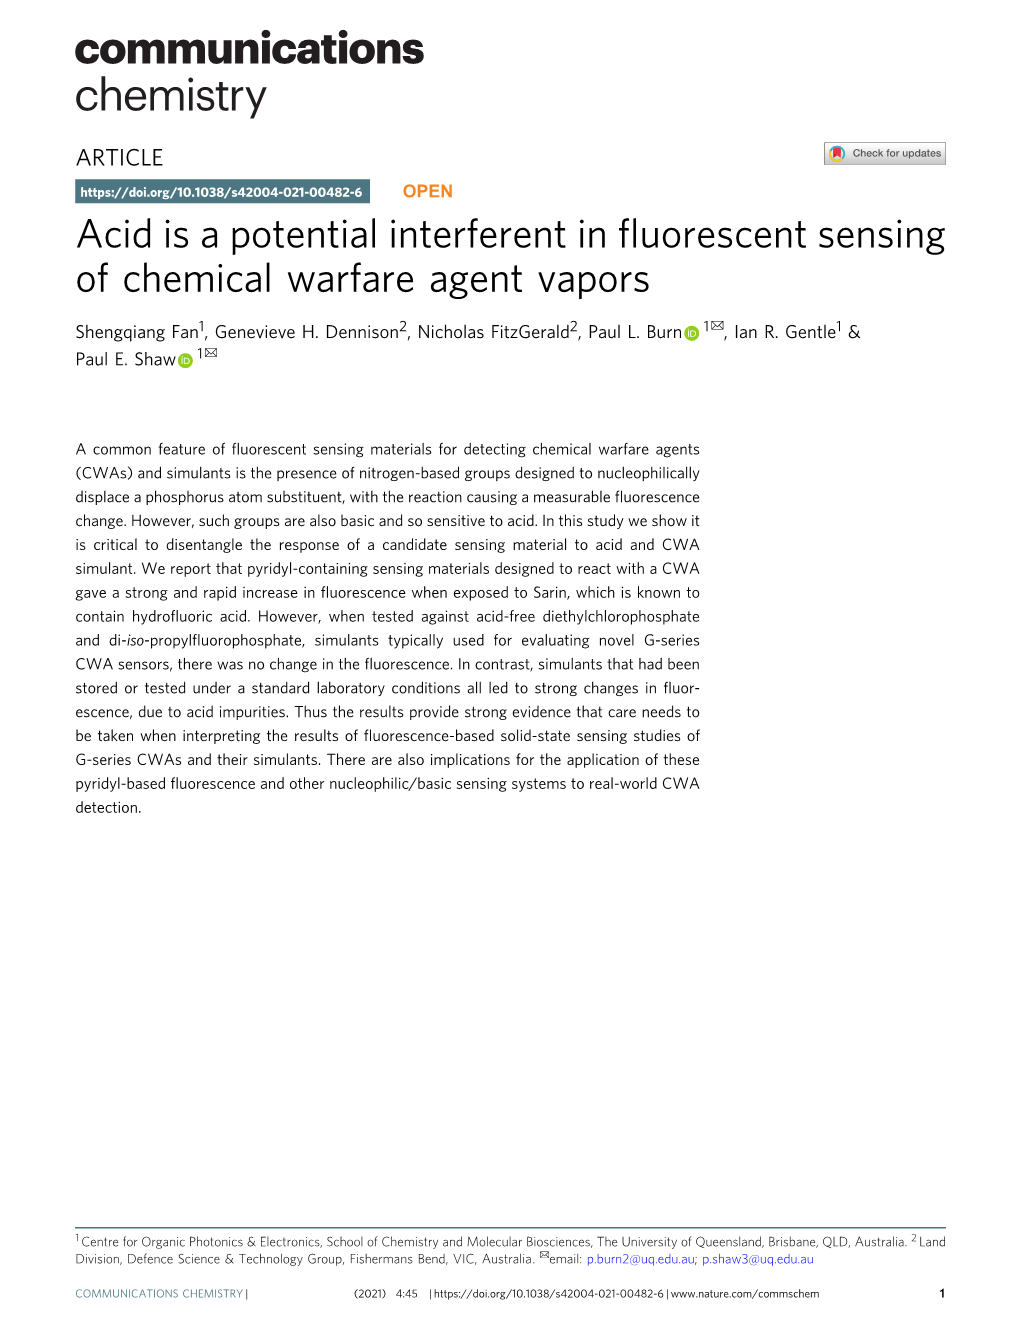 Acid Is a Potential Interferent in Fluorescent Sensing of Chemical